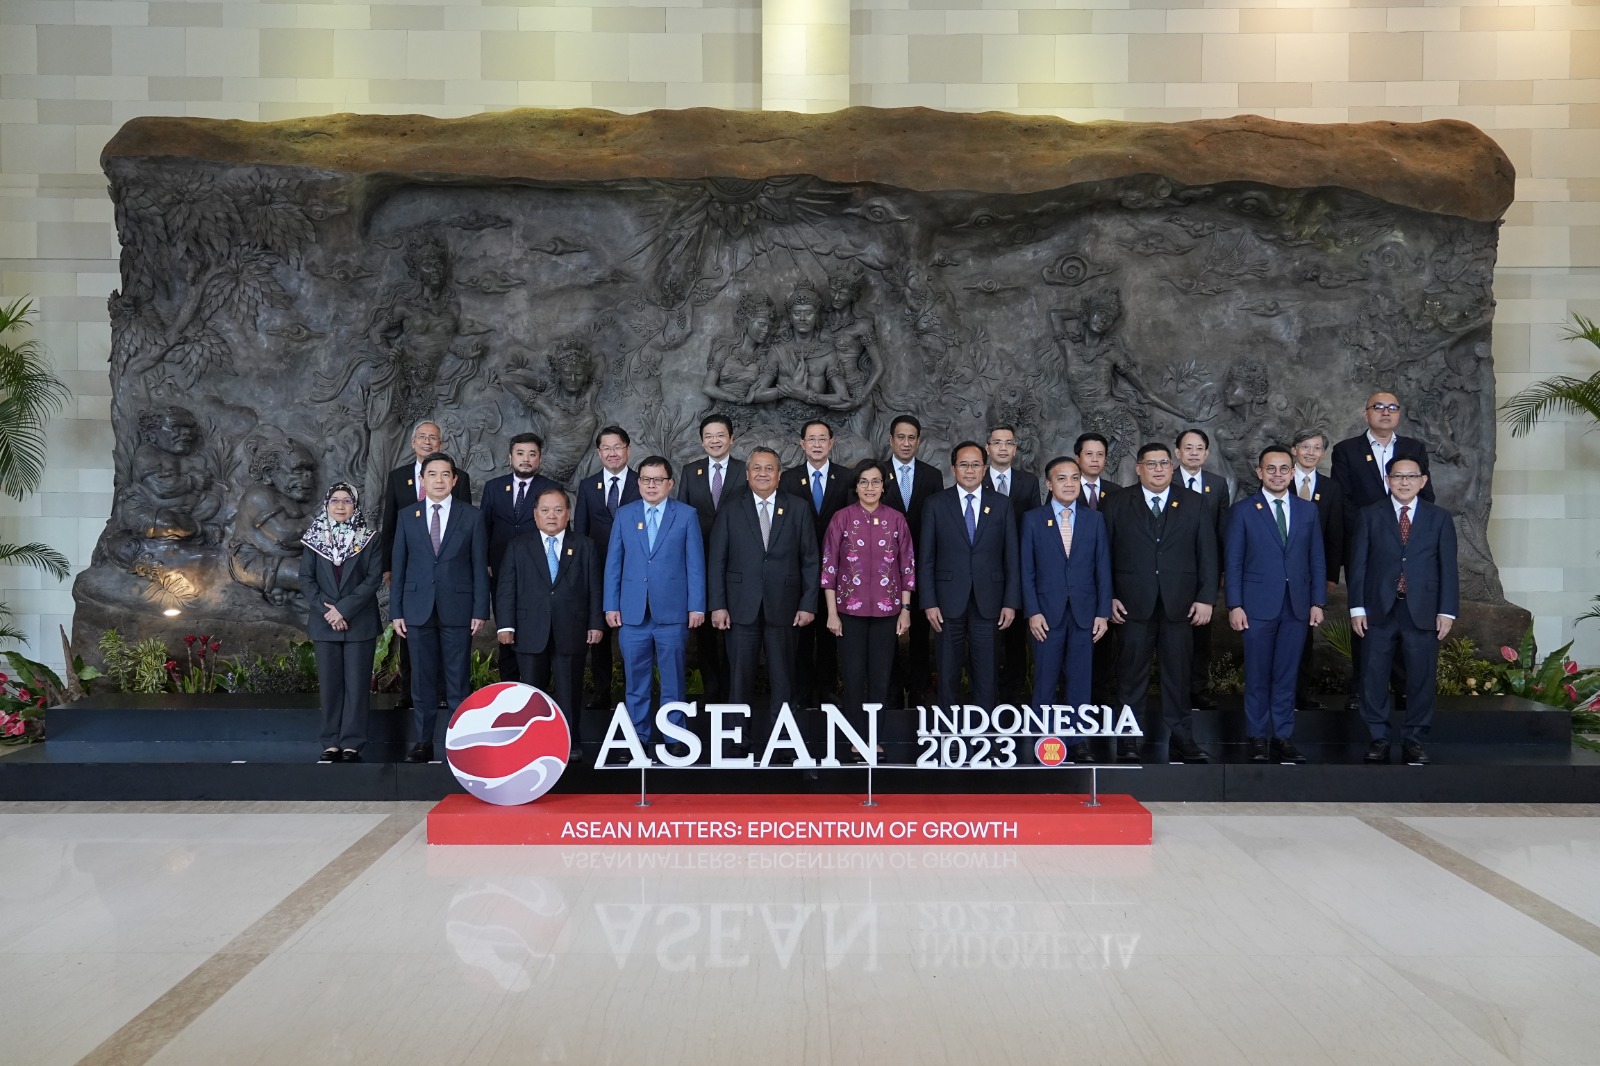 ASEAN Members Commit to Maintaining Economic Stability at ASEAN Finance Ministers and Central Bank Governors Meeting, March 2023 in Bali